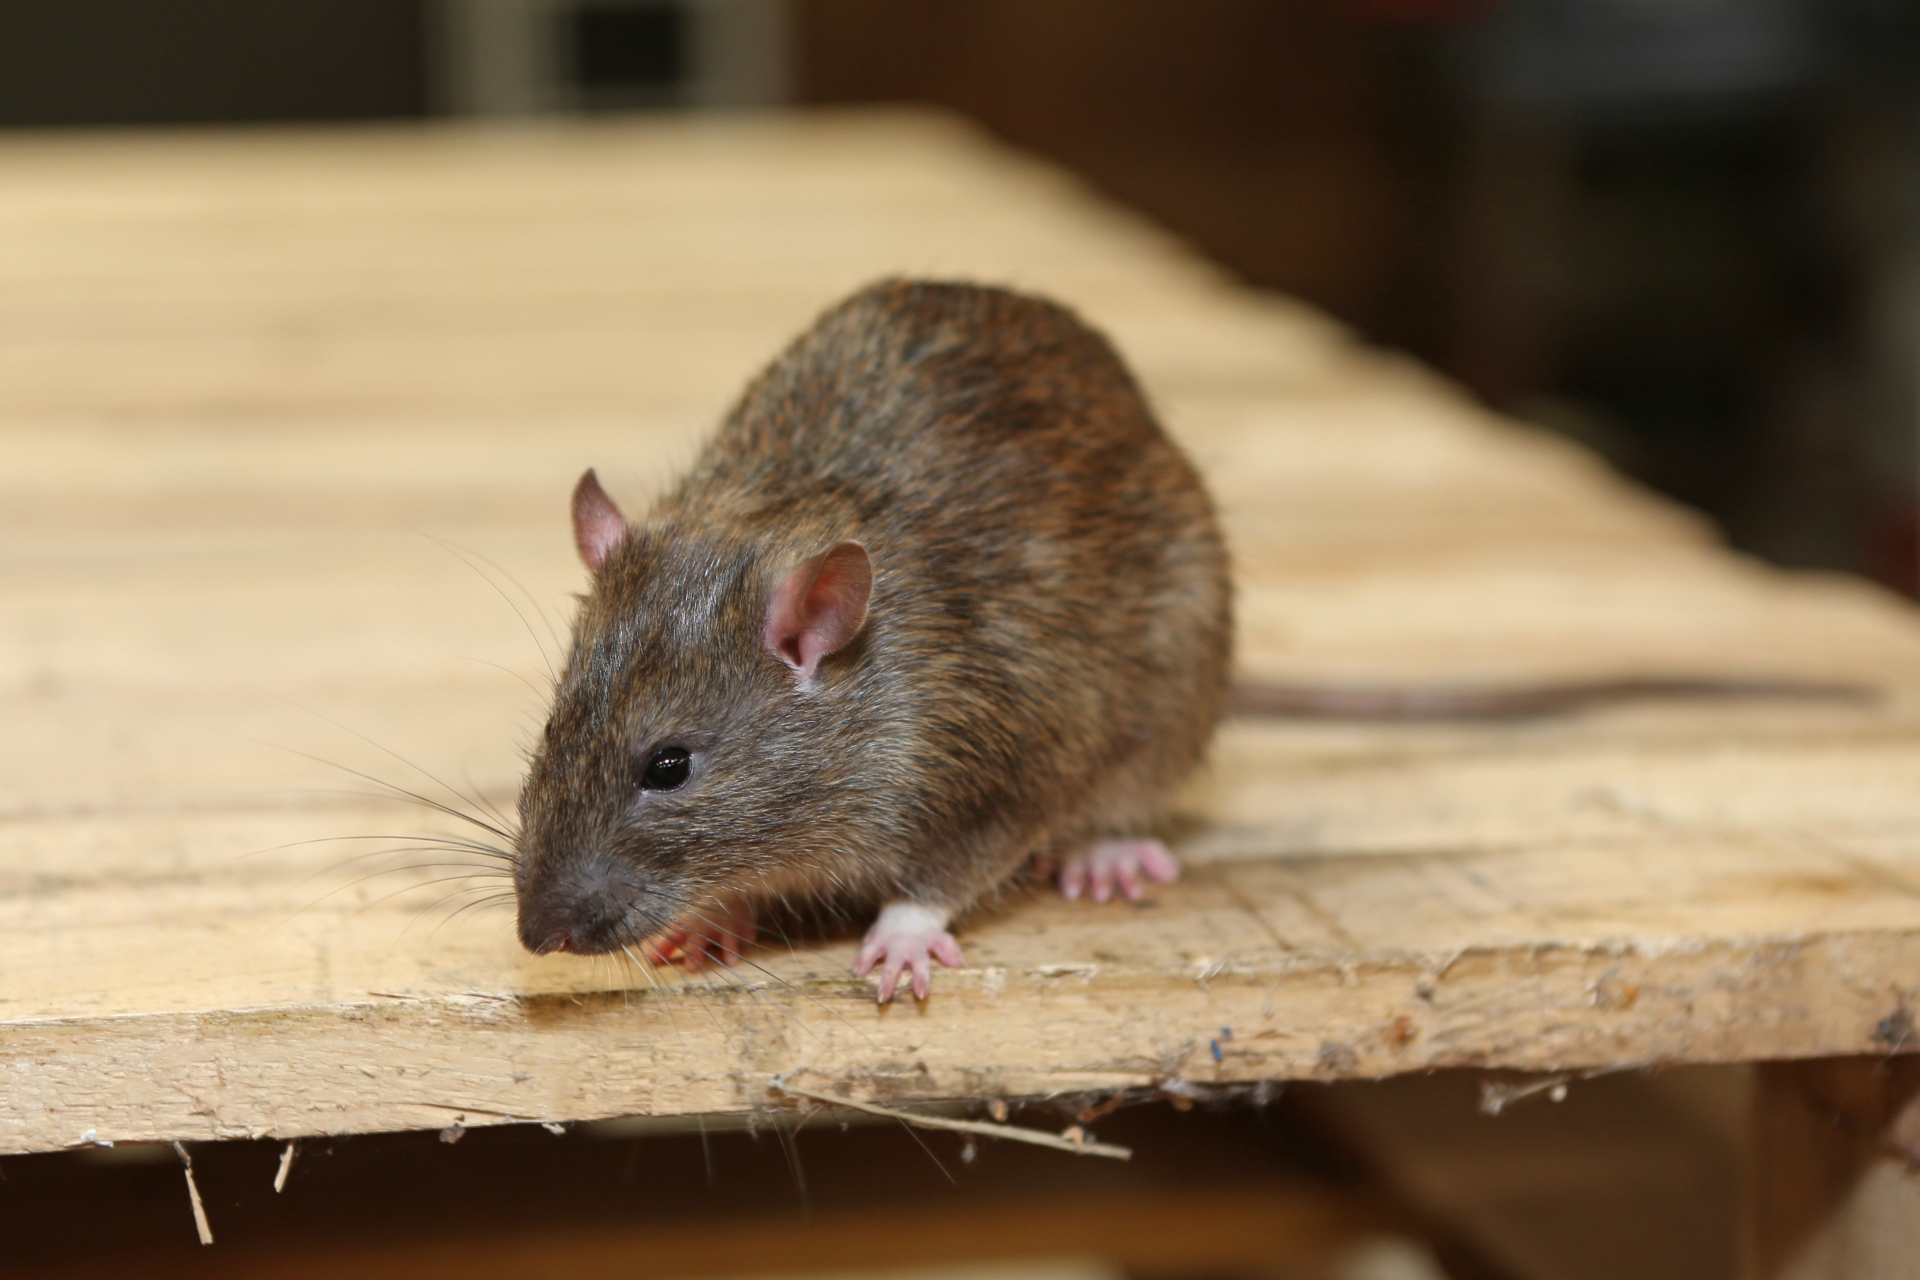 Rat Infestation, Pest Control in South Kensington, SW7. Call Now 020 8166 9746